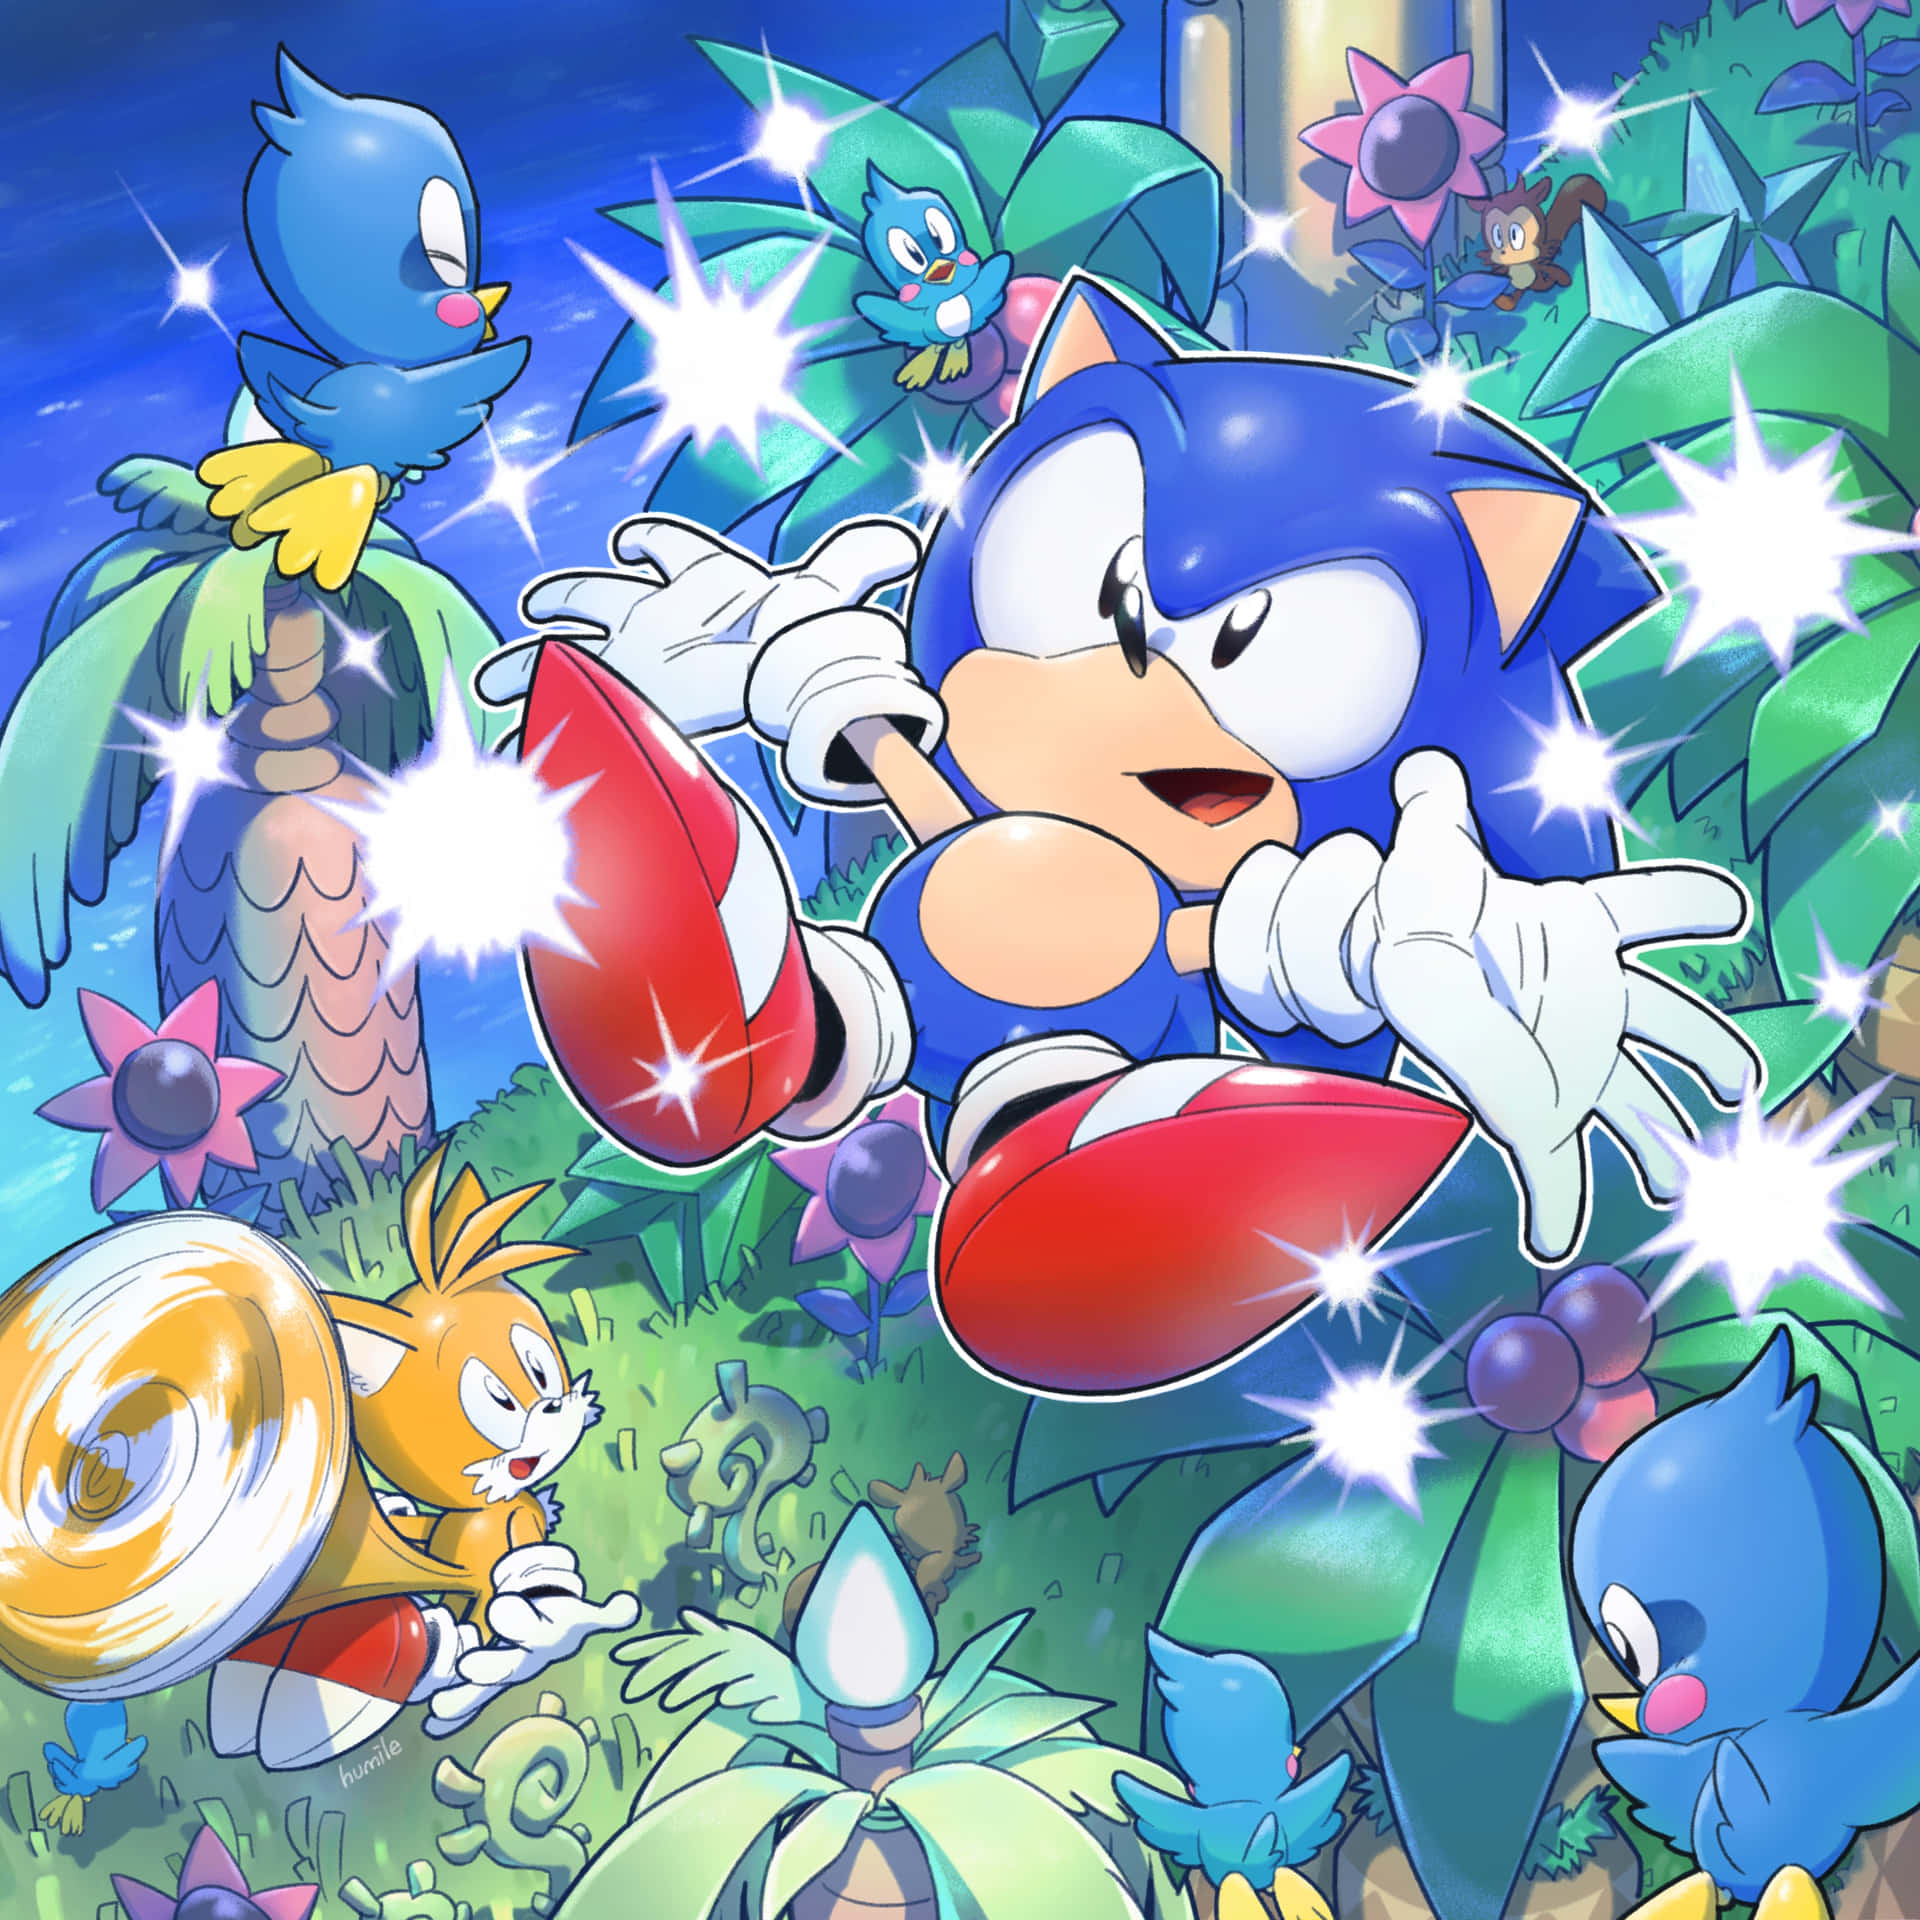 Classic Sonic the Hedgehog in action Wallpaper